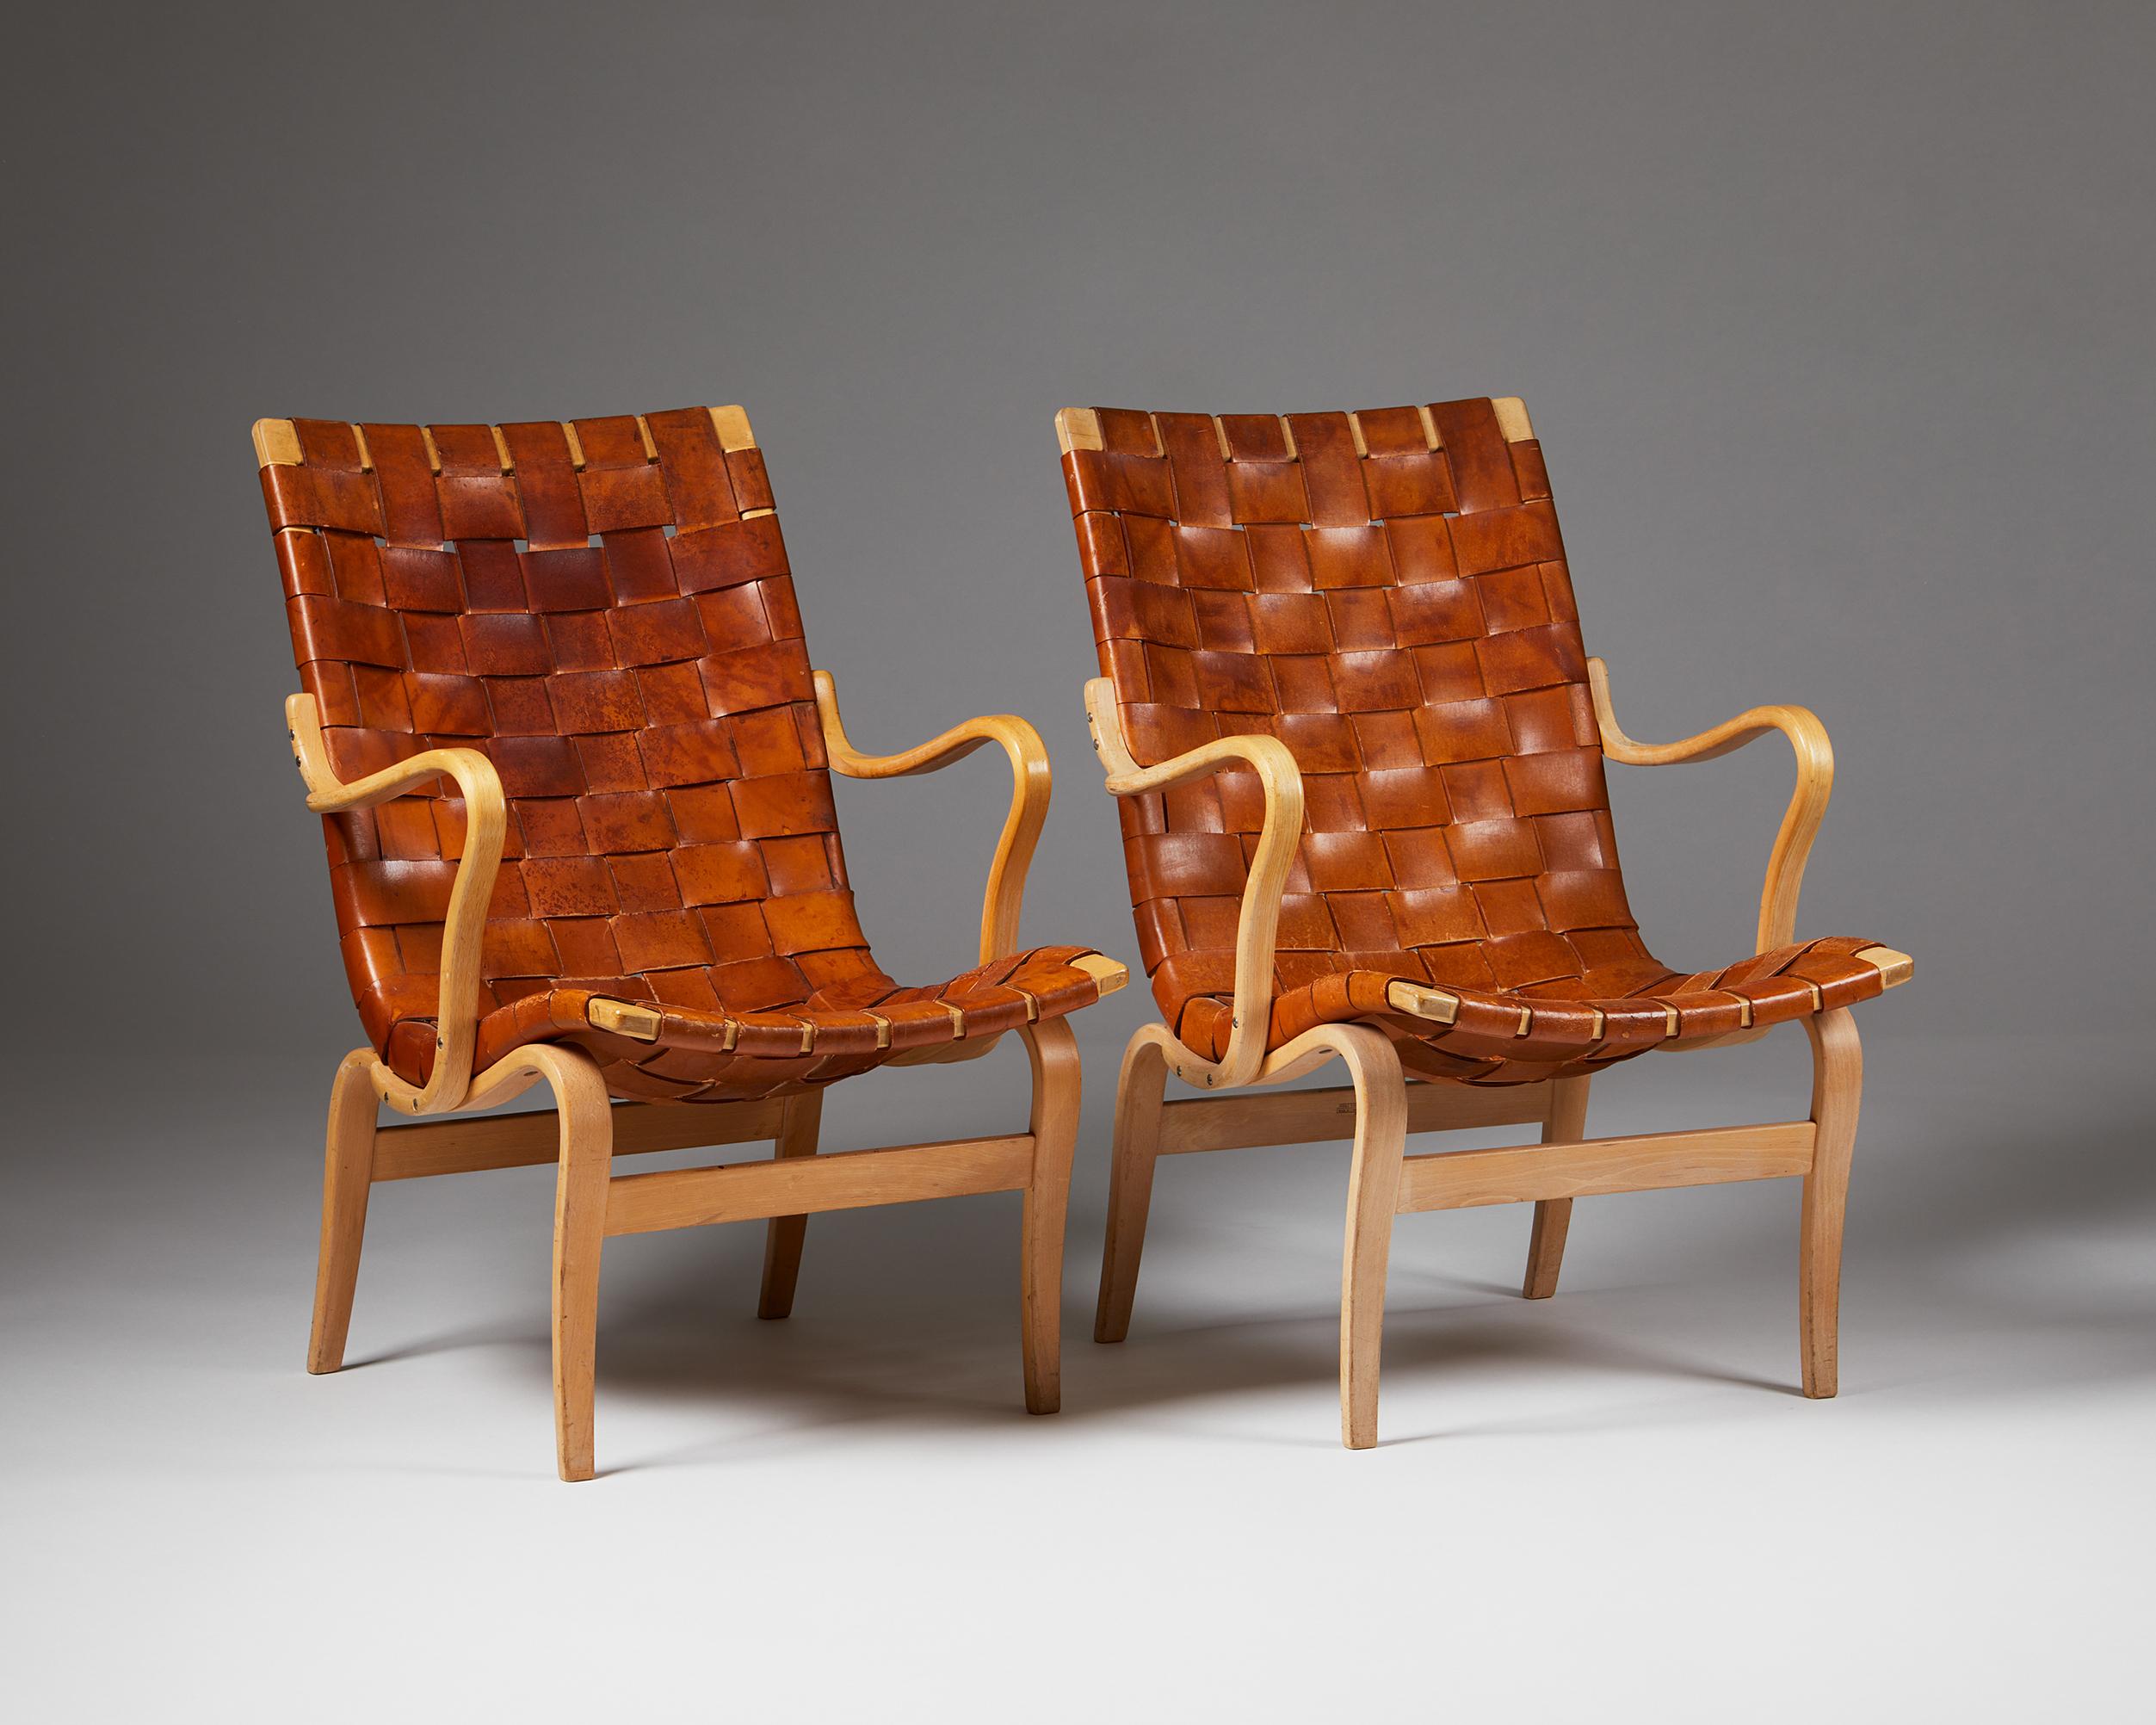 Pair of armchairs ‘Eva’ designed by Bruno Mathsson for Karl Mathsson,
Sweden. 1968.
Leather and birch.

Stamped.

With its characteristically curved legs and armrests, this iconic chair model 